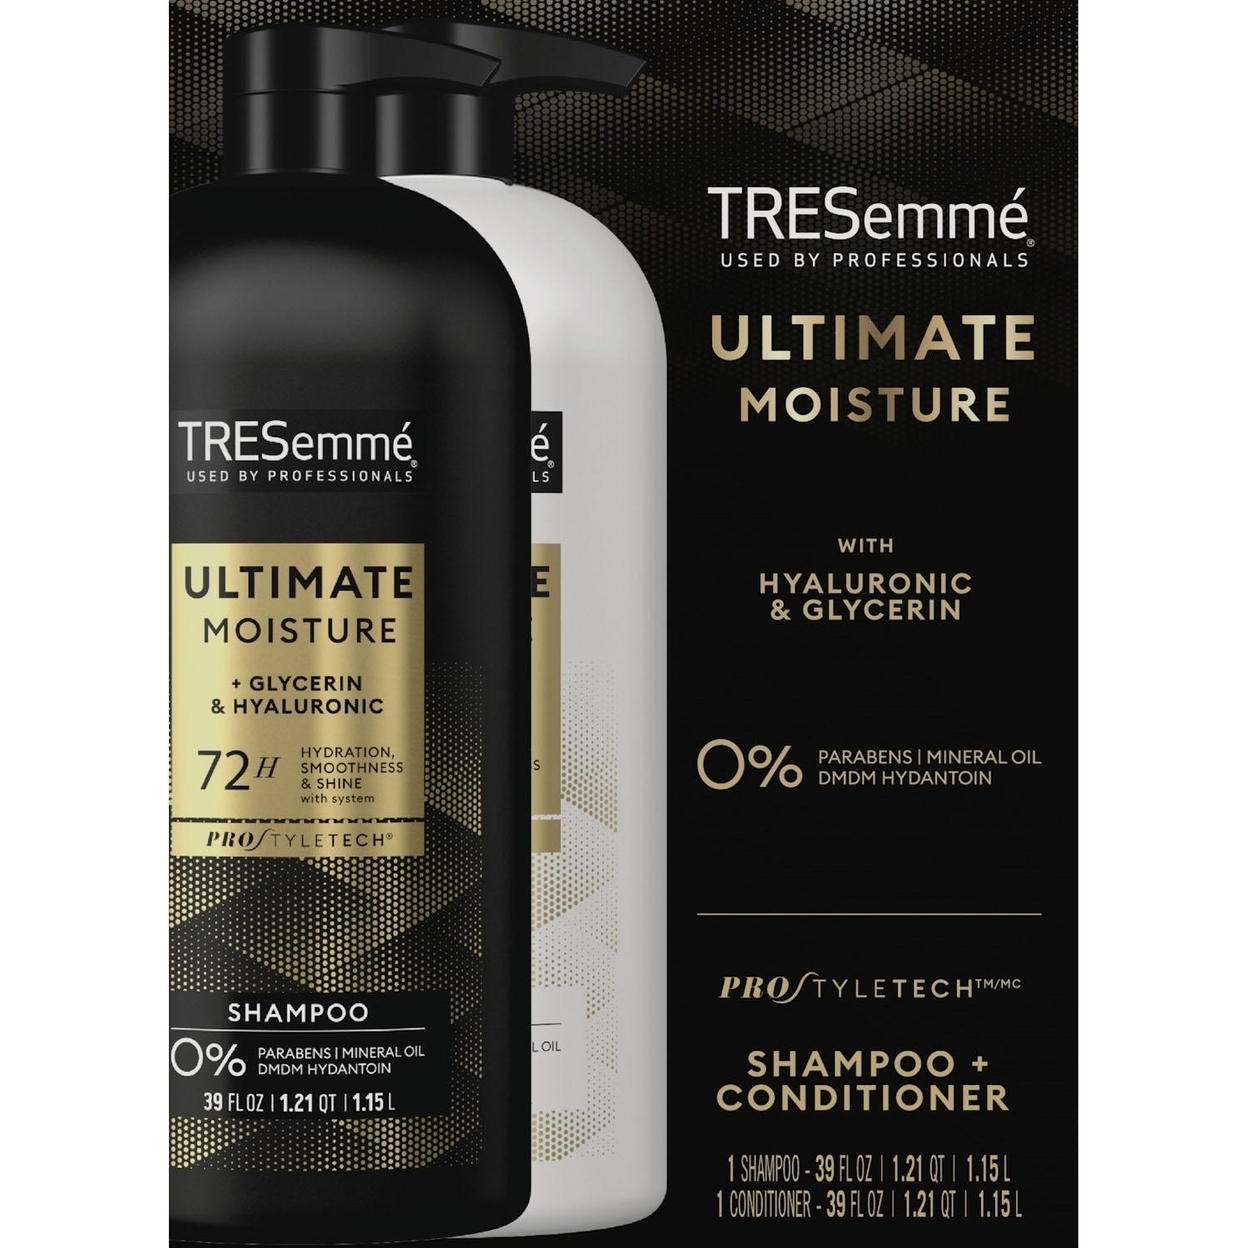 TRESemme Ultimate Moisture Shampoo And Conditioner, 39 Fluid Ounce (Pack Of 2)